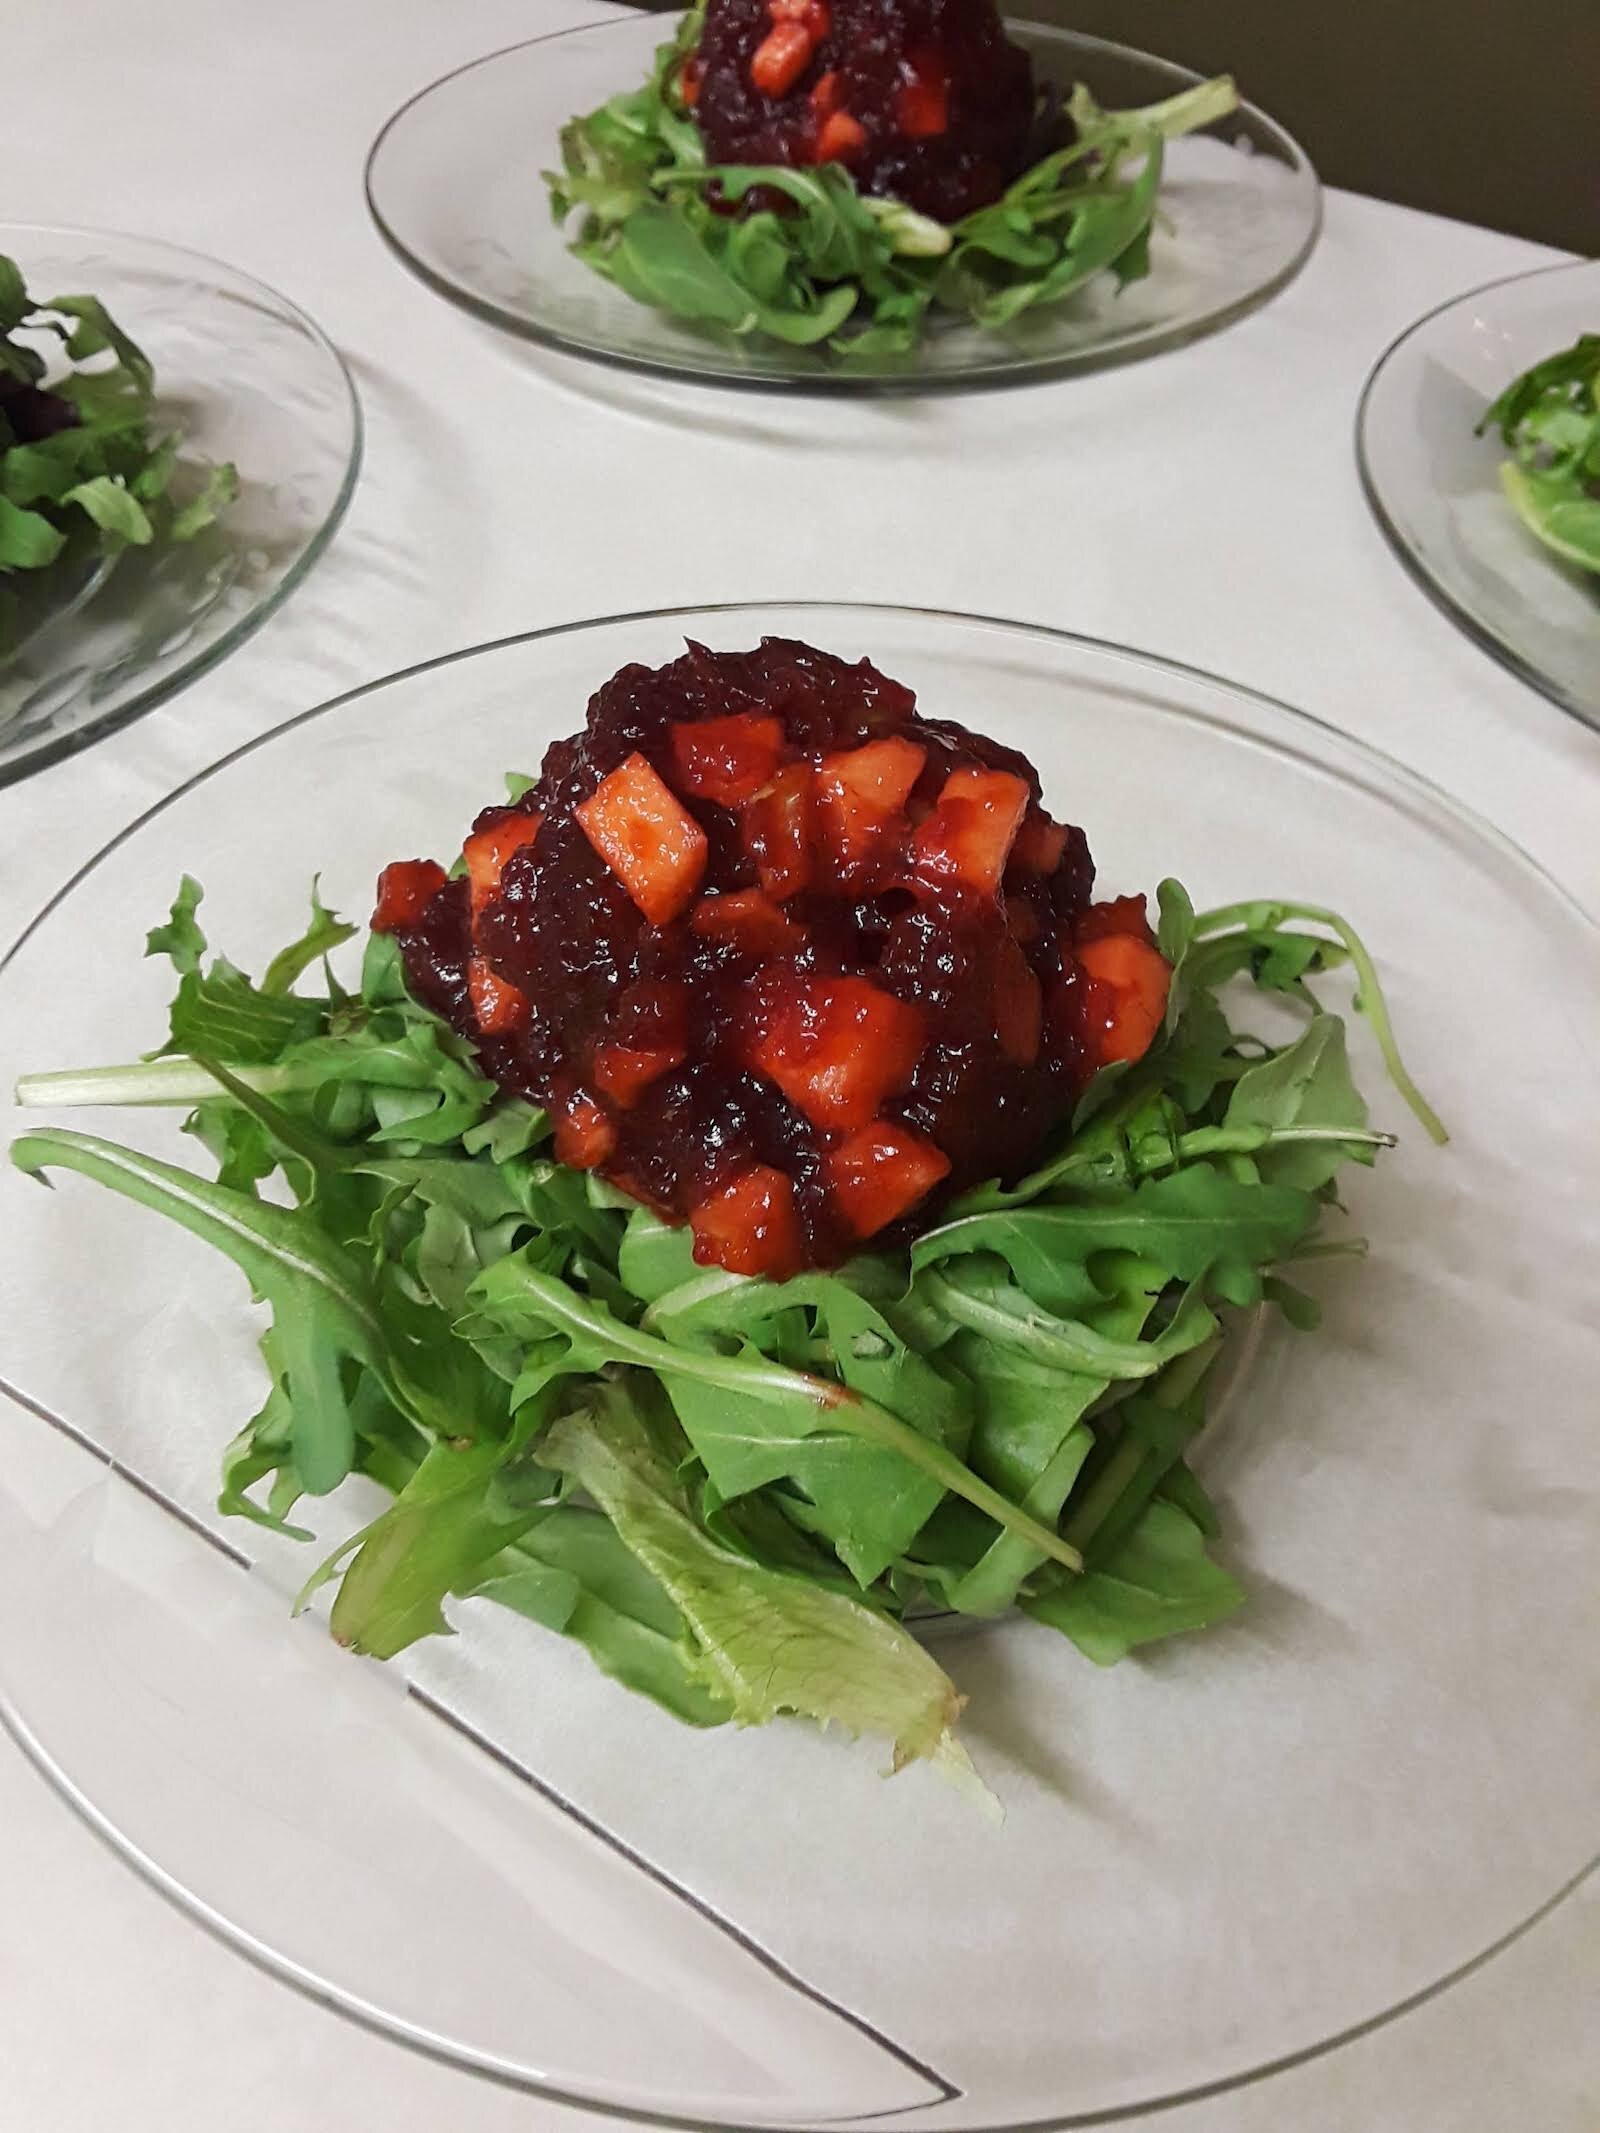 A cranberry apple salad made by Executive Chef Heather Chenault.